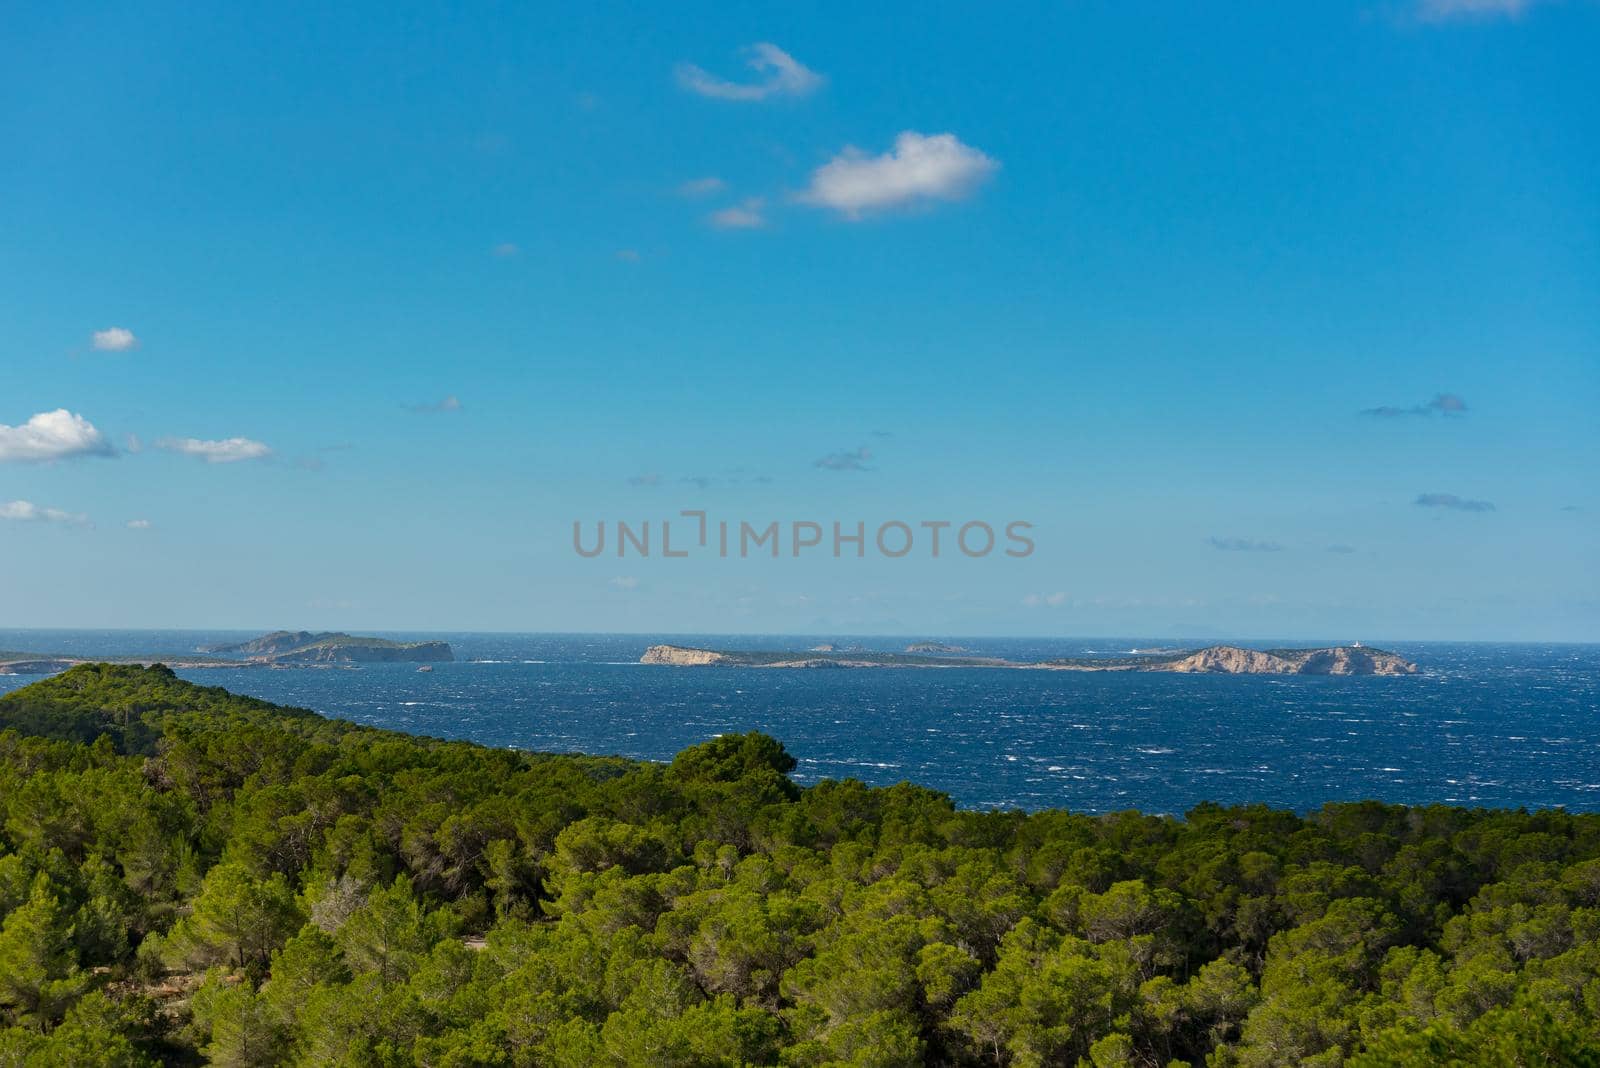 Panoramic view of the city of Sant Antoni de Portmany in Ibiza, Spain by martinscphoto